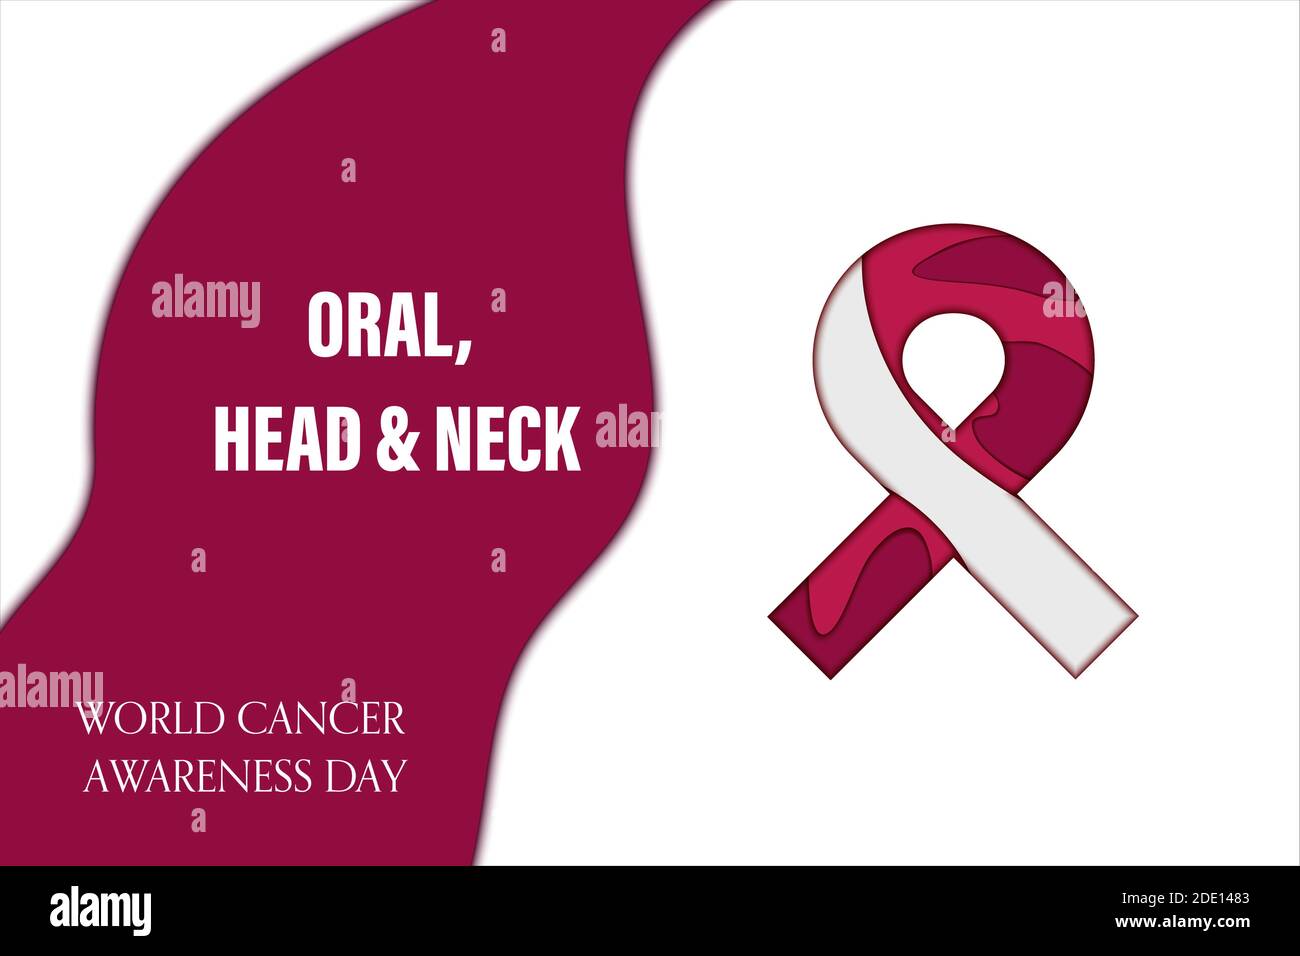 Oral, head and neck cancer, conceptual illustration Stock Photo